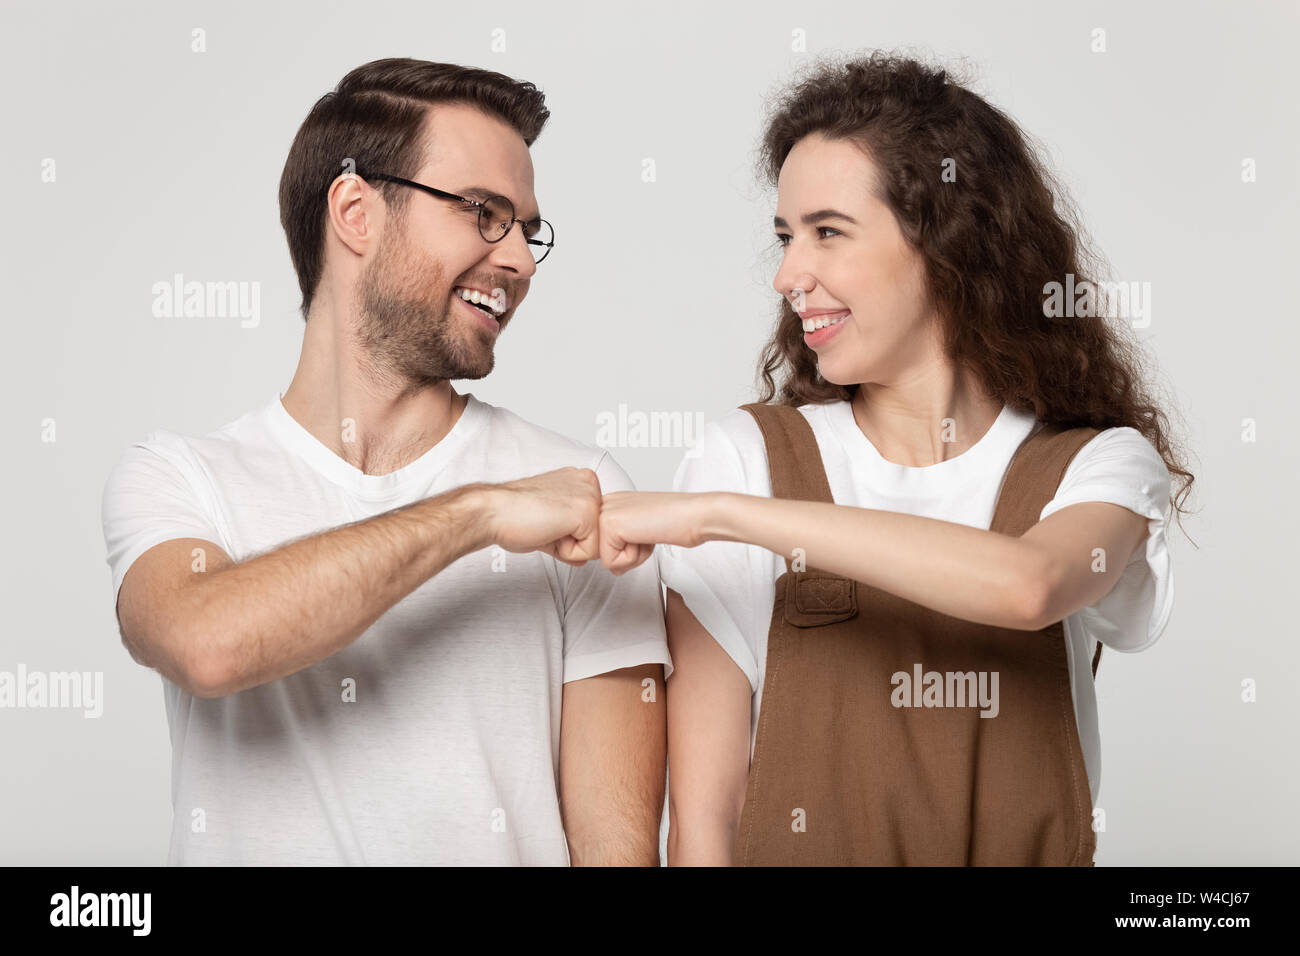 Girl guy smiling gives fist bump pose isolated on grey Stock Photo